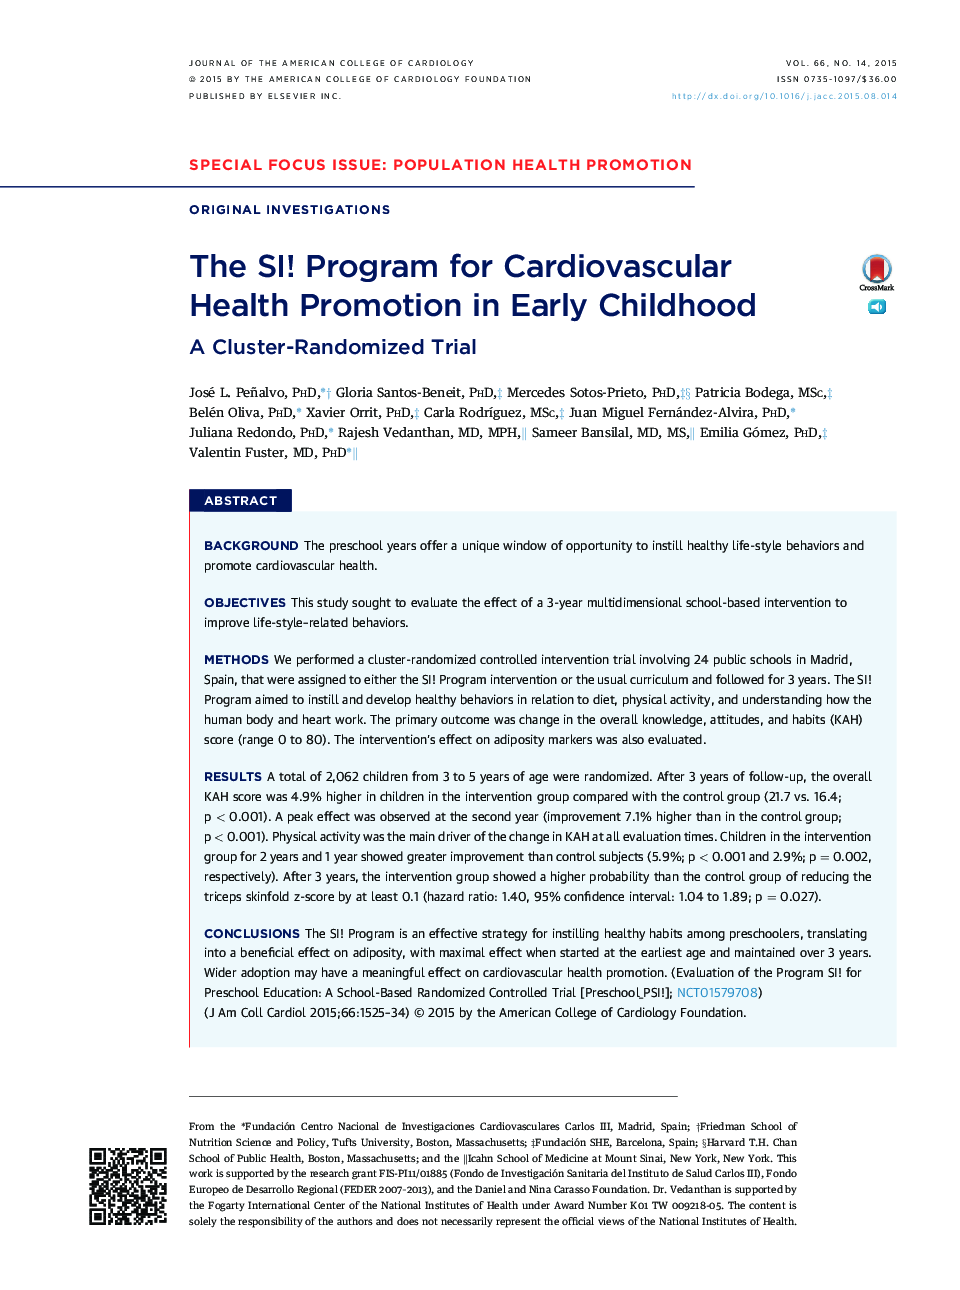 The SI! Program for Cardiovascular HealthÂ Promotion in Early Childhood: A Cluster-Randomized Trial